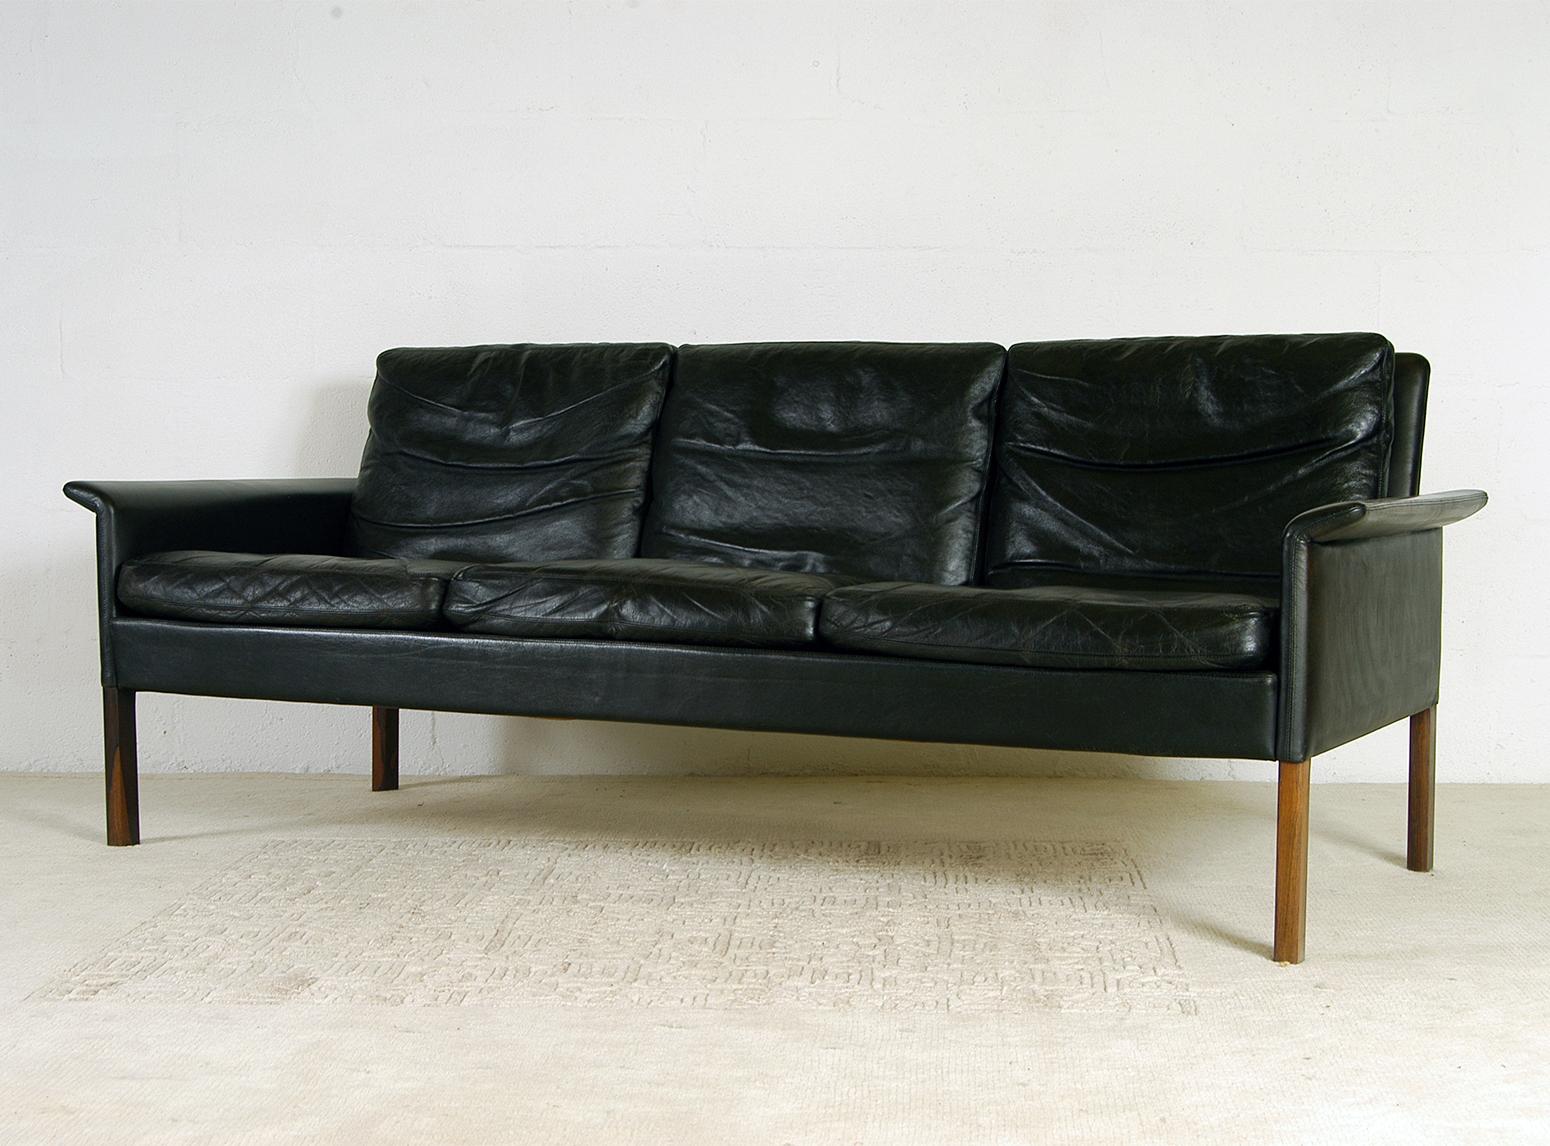 Superbly elegant three-seat sofa model CS500/3 designed by Hans Olsen in the 1960s for Christian Sorensen, Glostrup, Denmark, with very nice original patina.
The sofa is in good original condition, retaining its original, supple, top-grain black